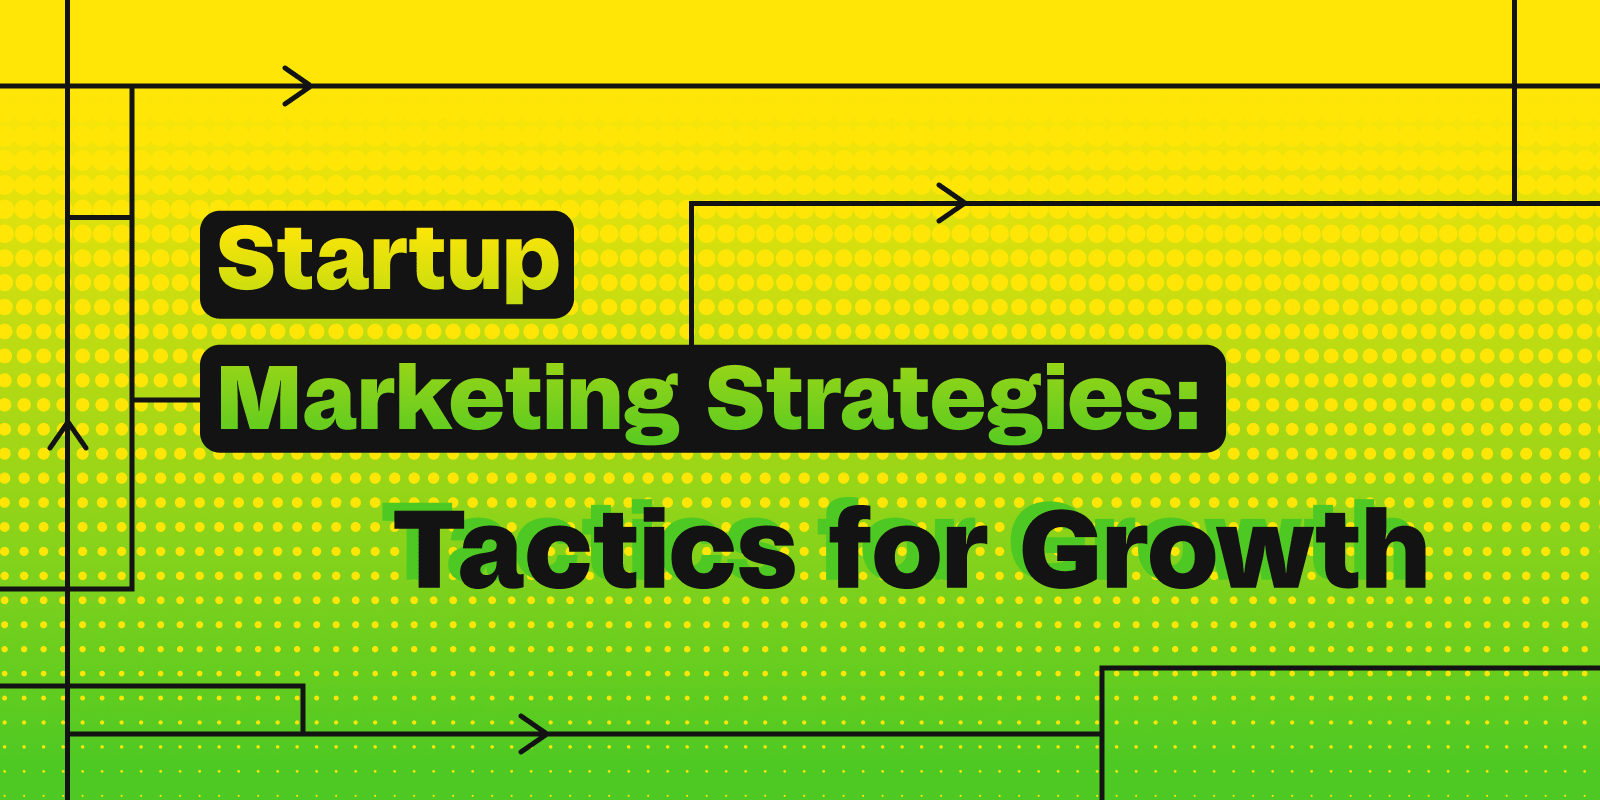 Startup Marketing Strategies: Tactics for Growth